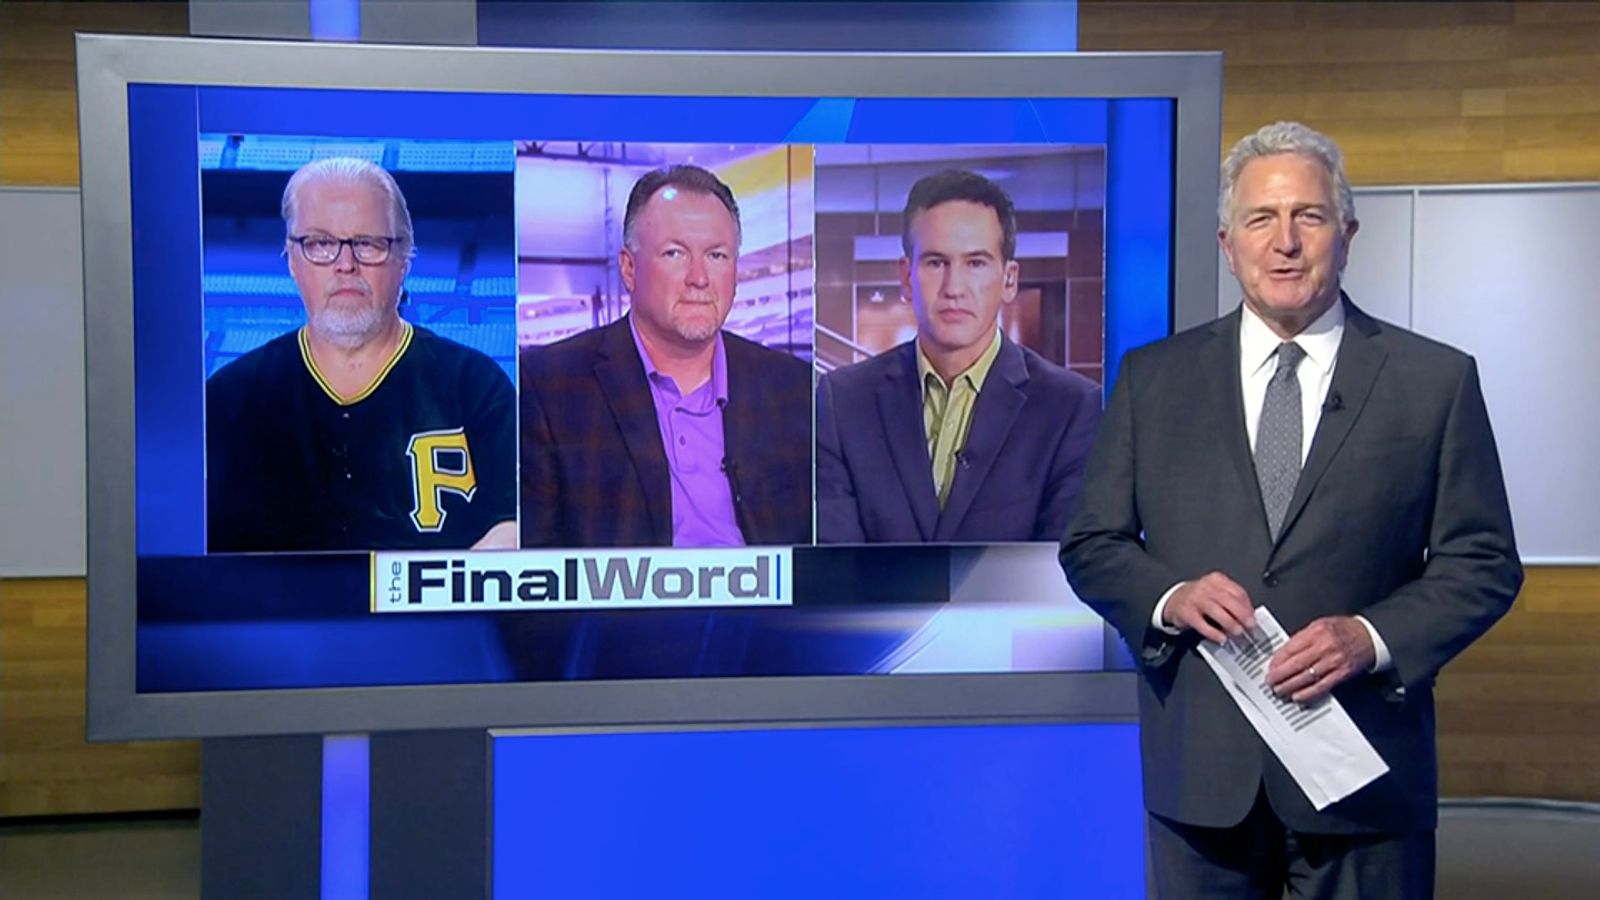 DK on WPXI's 'Final Word' with Alby Oxenreiter, Mark Madden, Tim